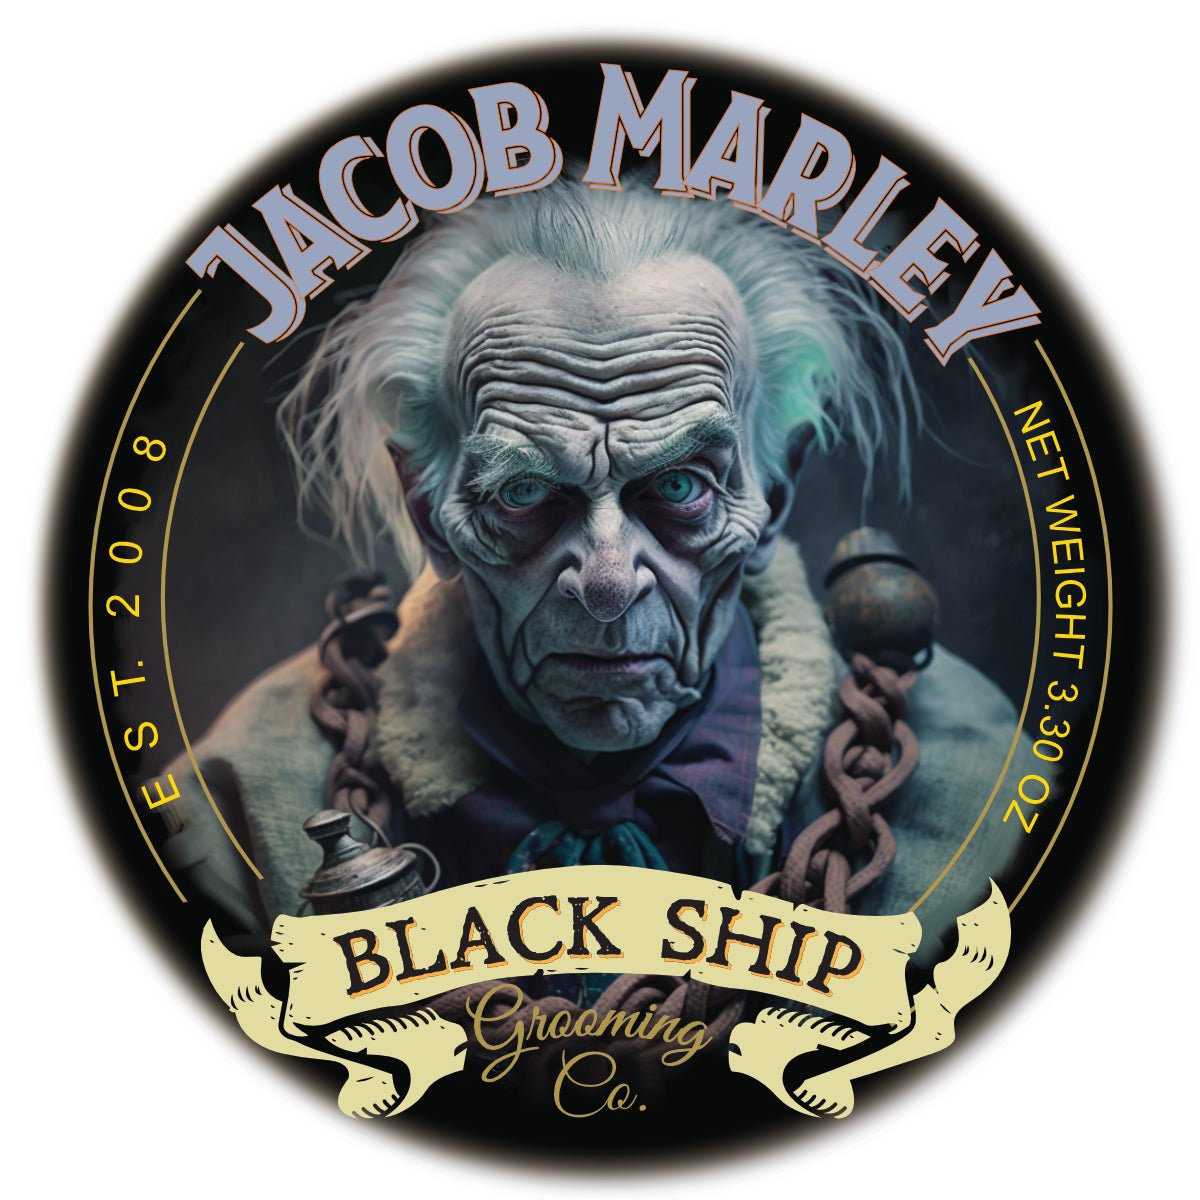 Marley Aftershave - Black Ship Grooming Co.